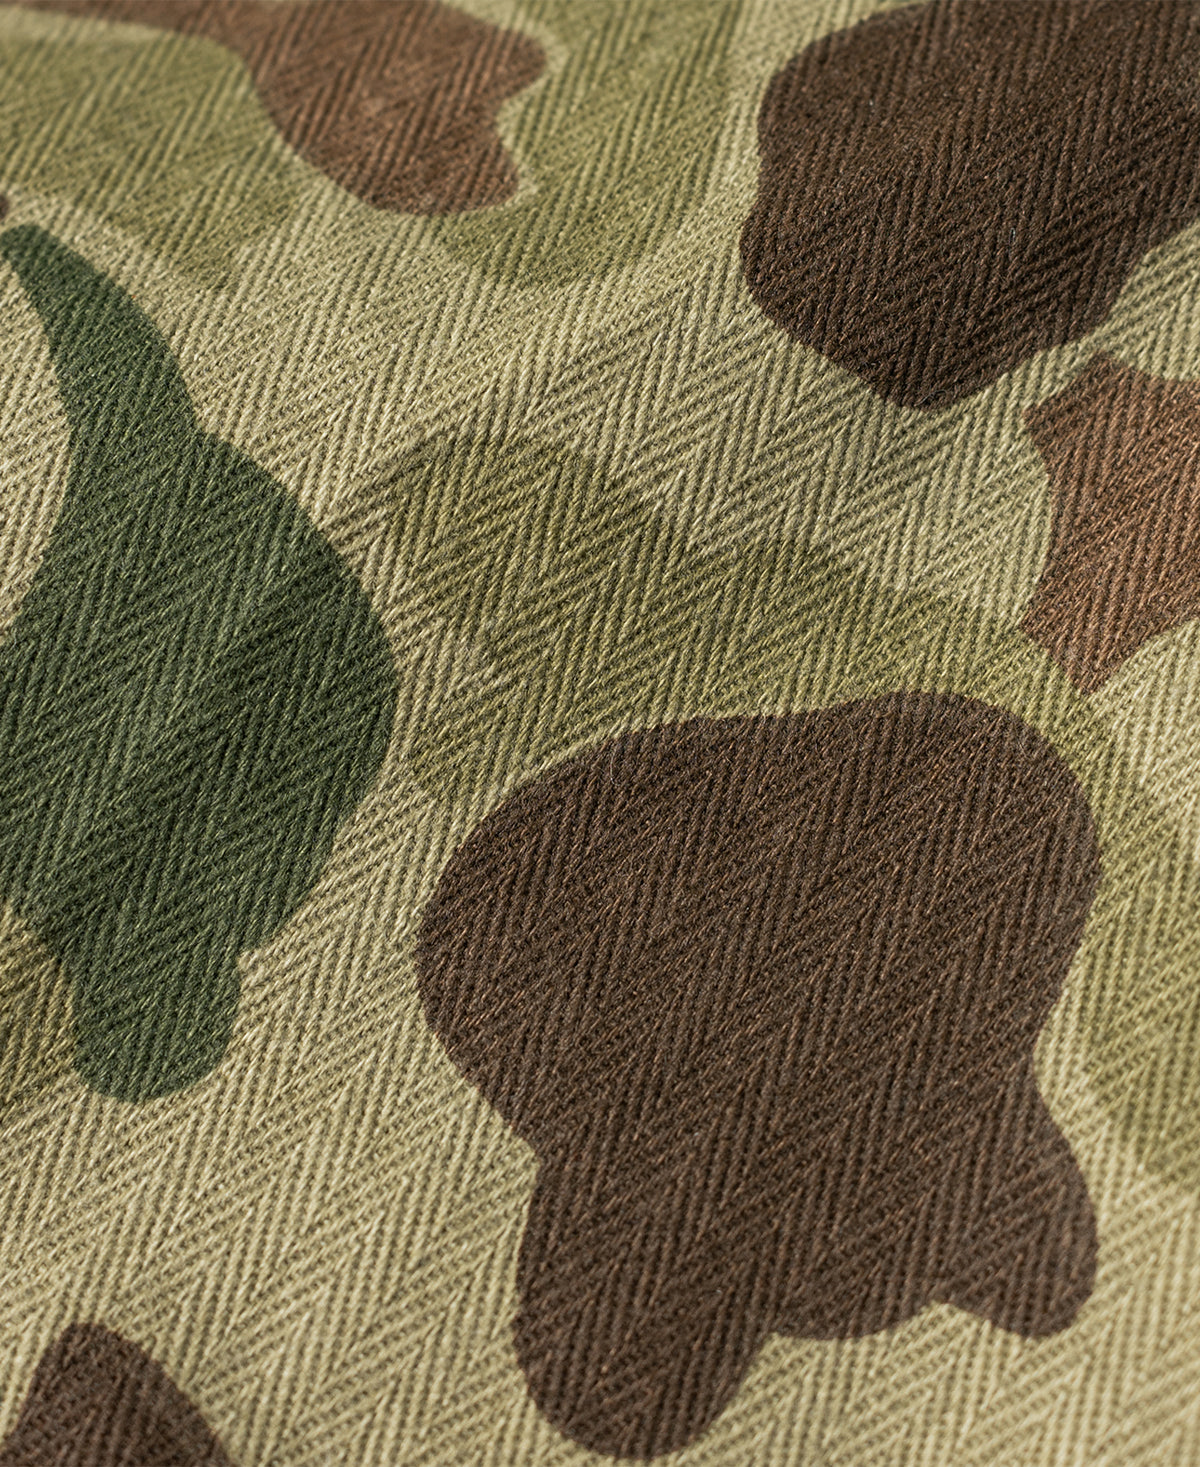 Military Style Duffle Bag - Camouflage